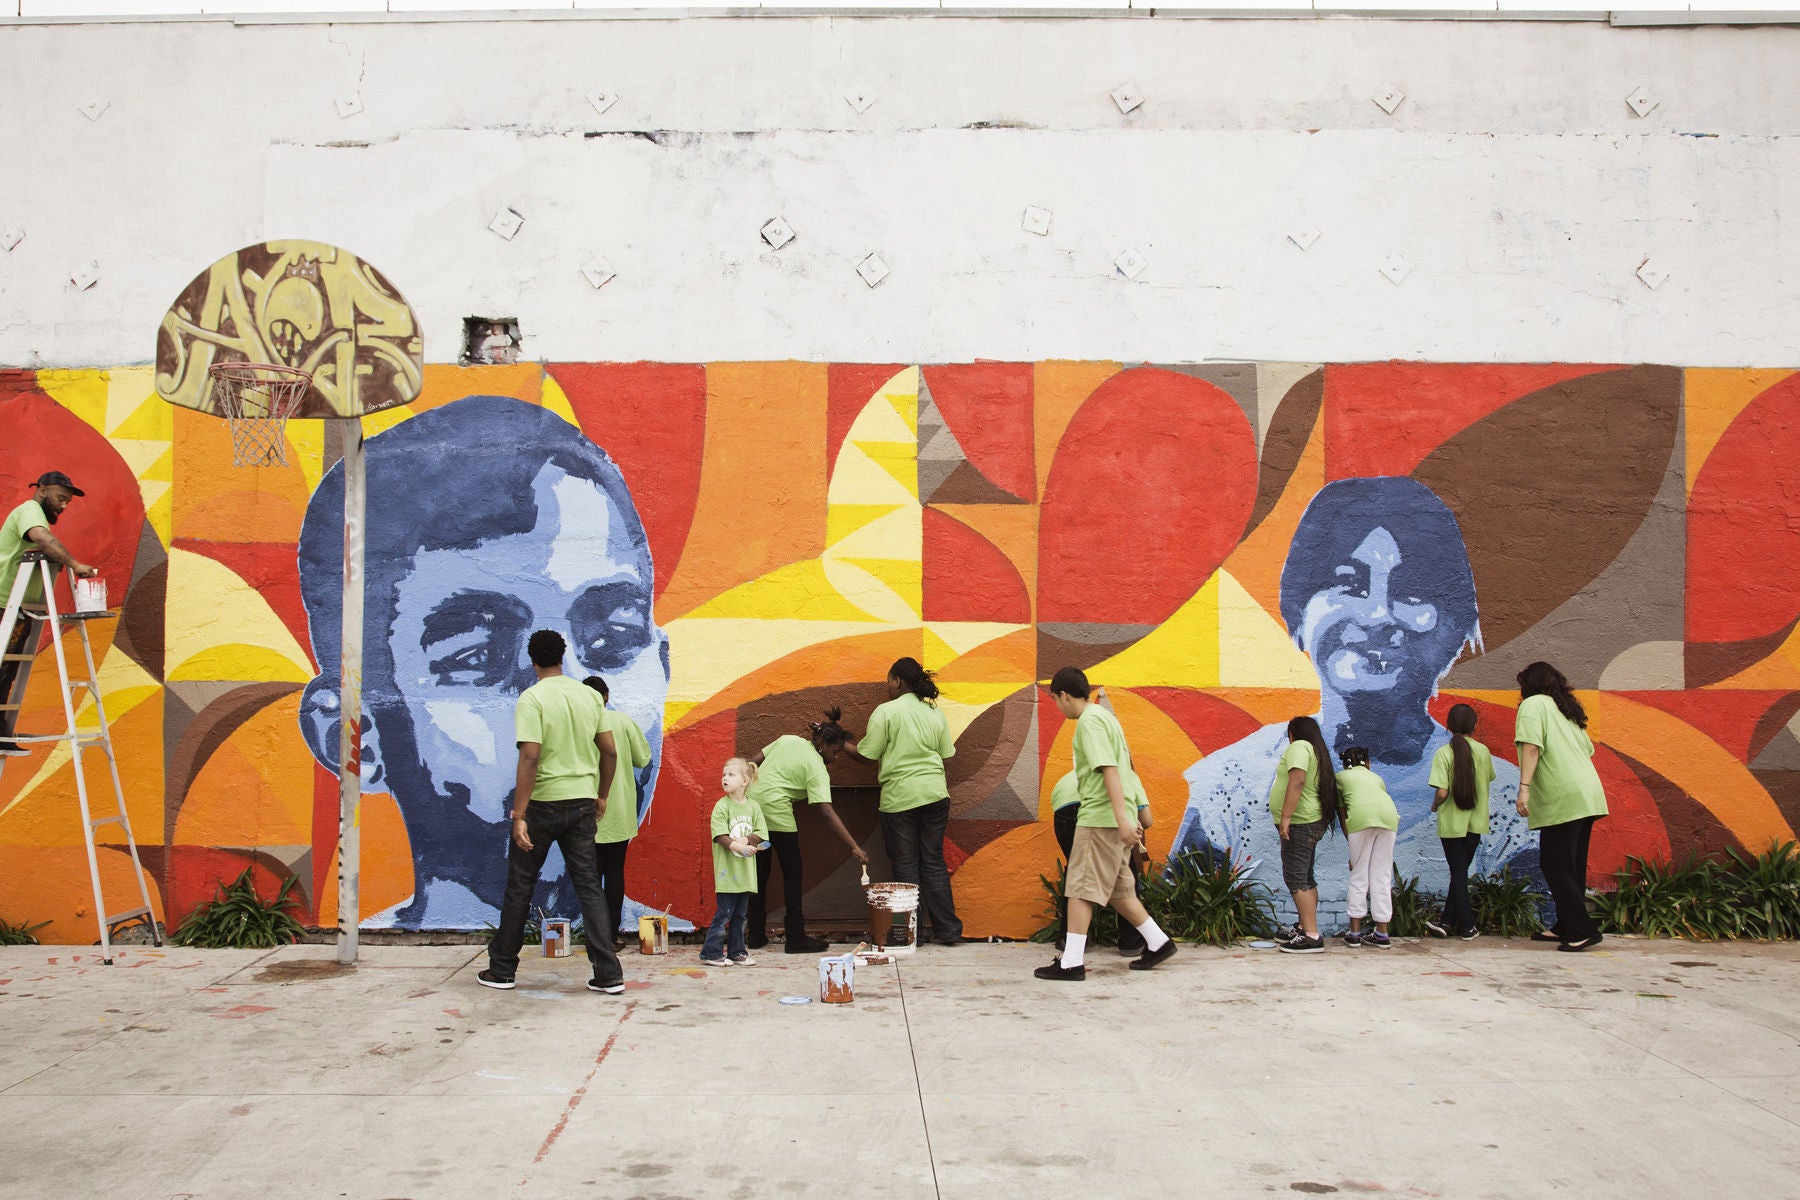 A group of people painting a mural on a commmunity wall